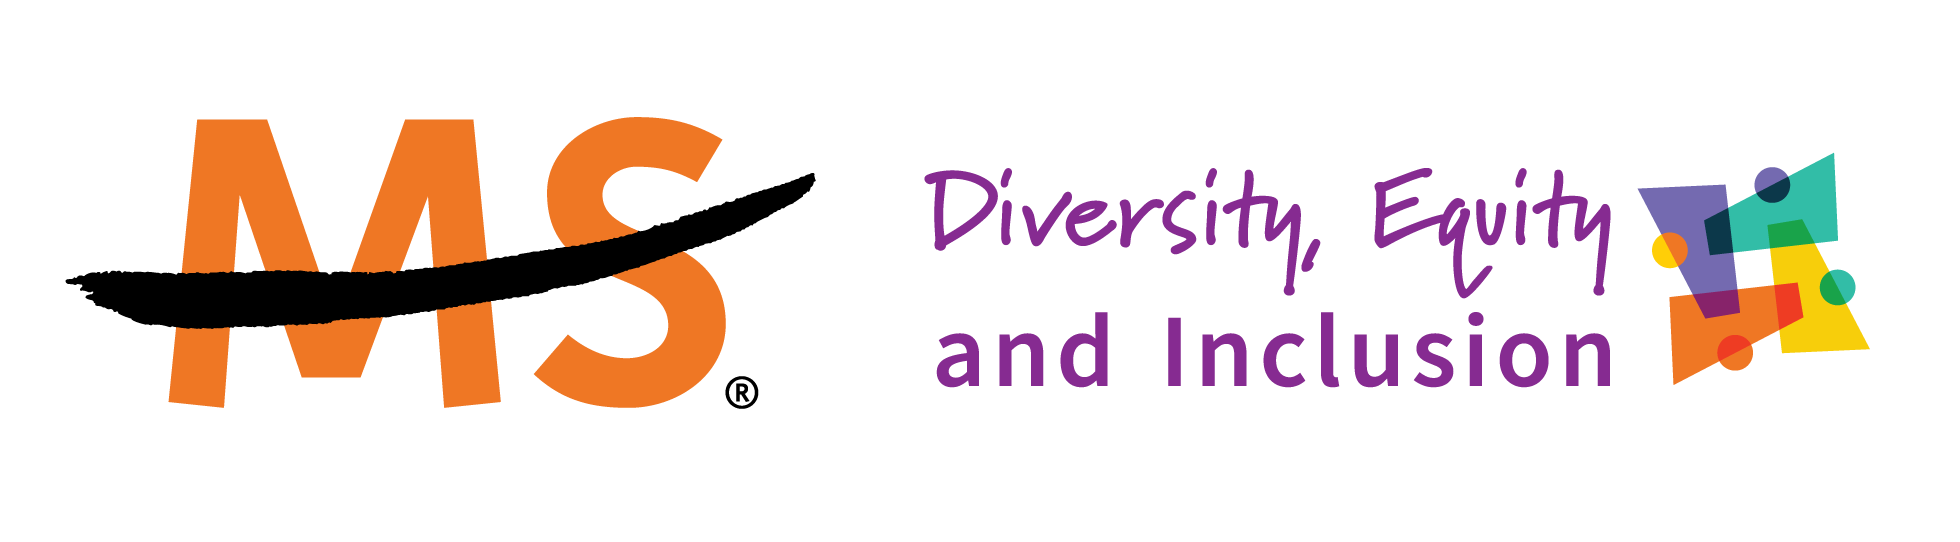 Diversity, Equity and Inclusion logo with colorful design